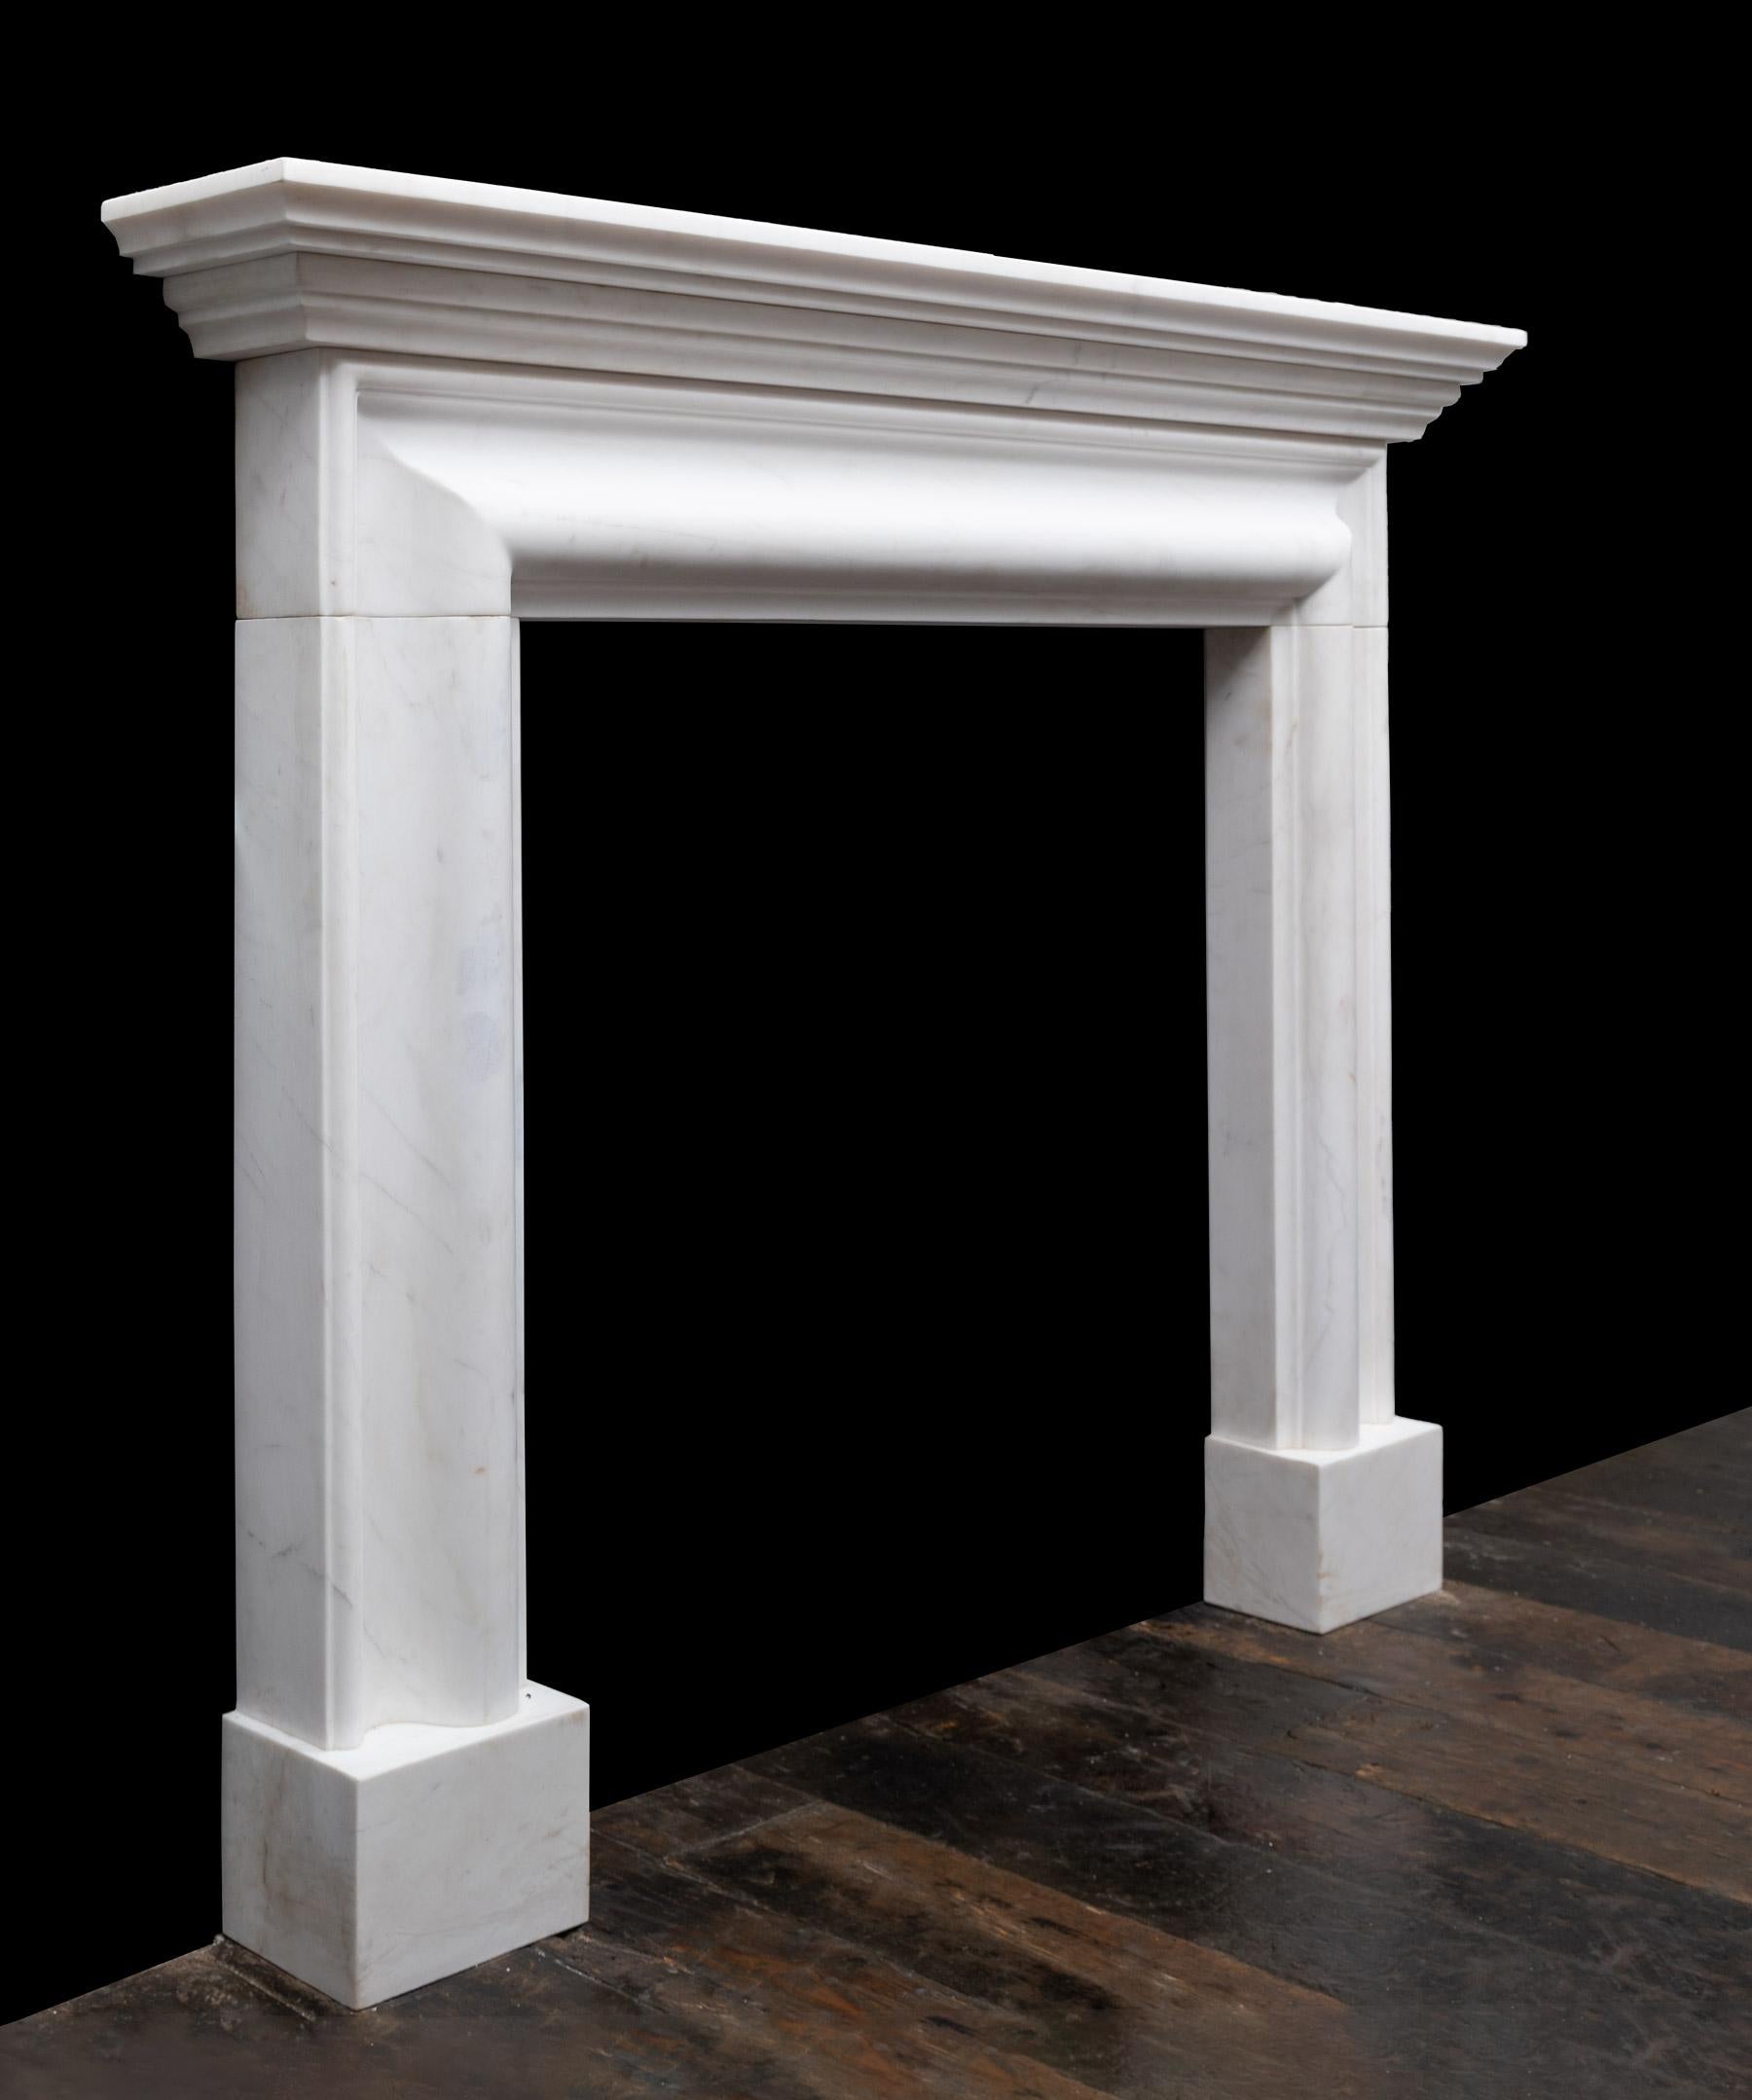 A stylish and fashionable fireplace design produced in white statuary marble. The fireplace has a moulded bolection frame on plain plinths, with a stepped cornice shelf on top.

A classic design fashionable in Europe for over three hundred years.